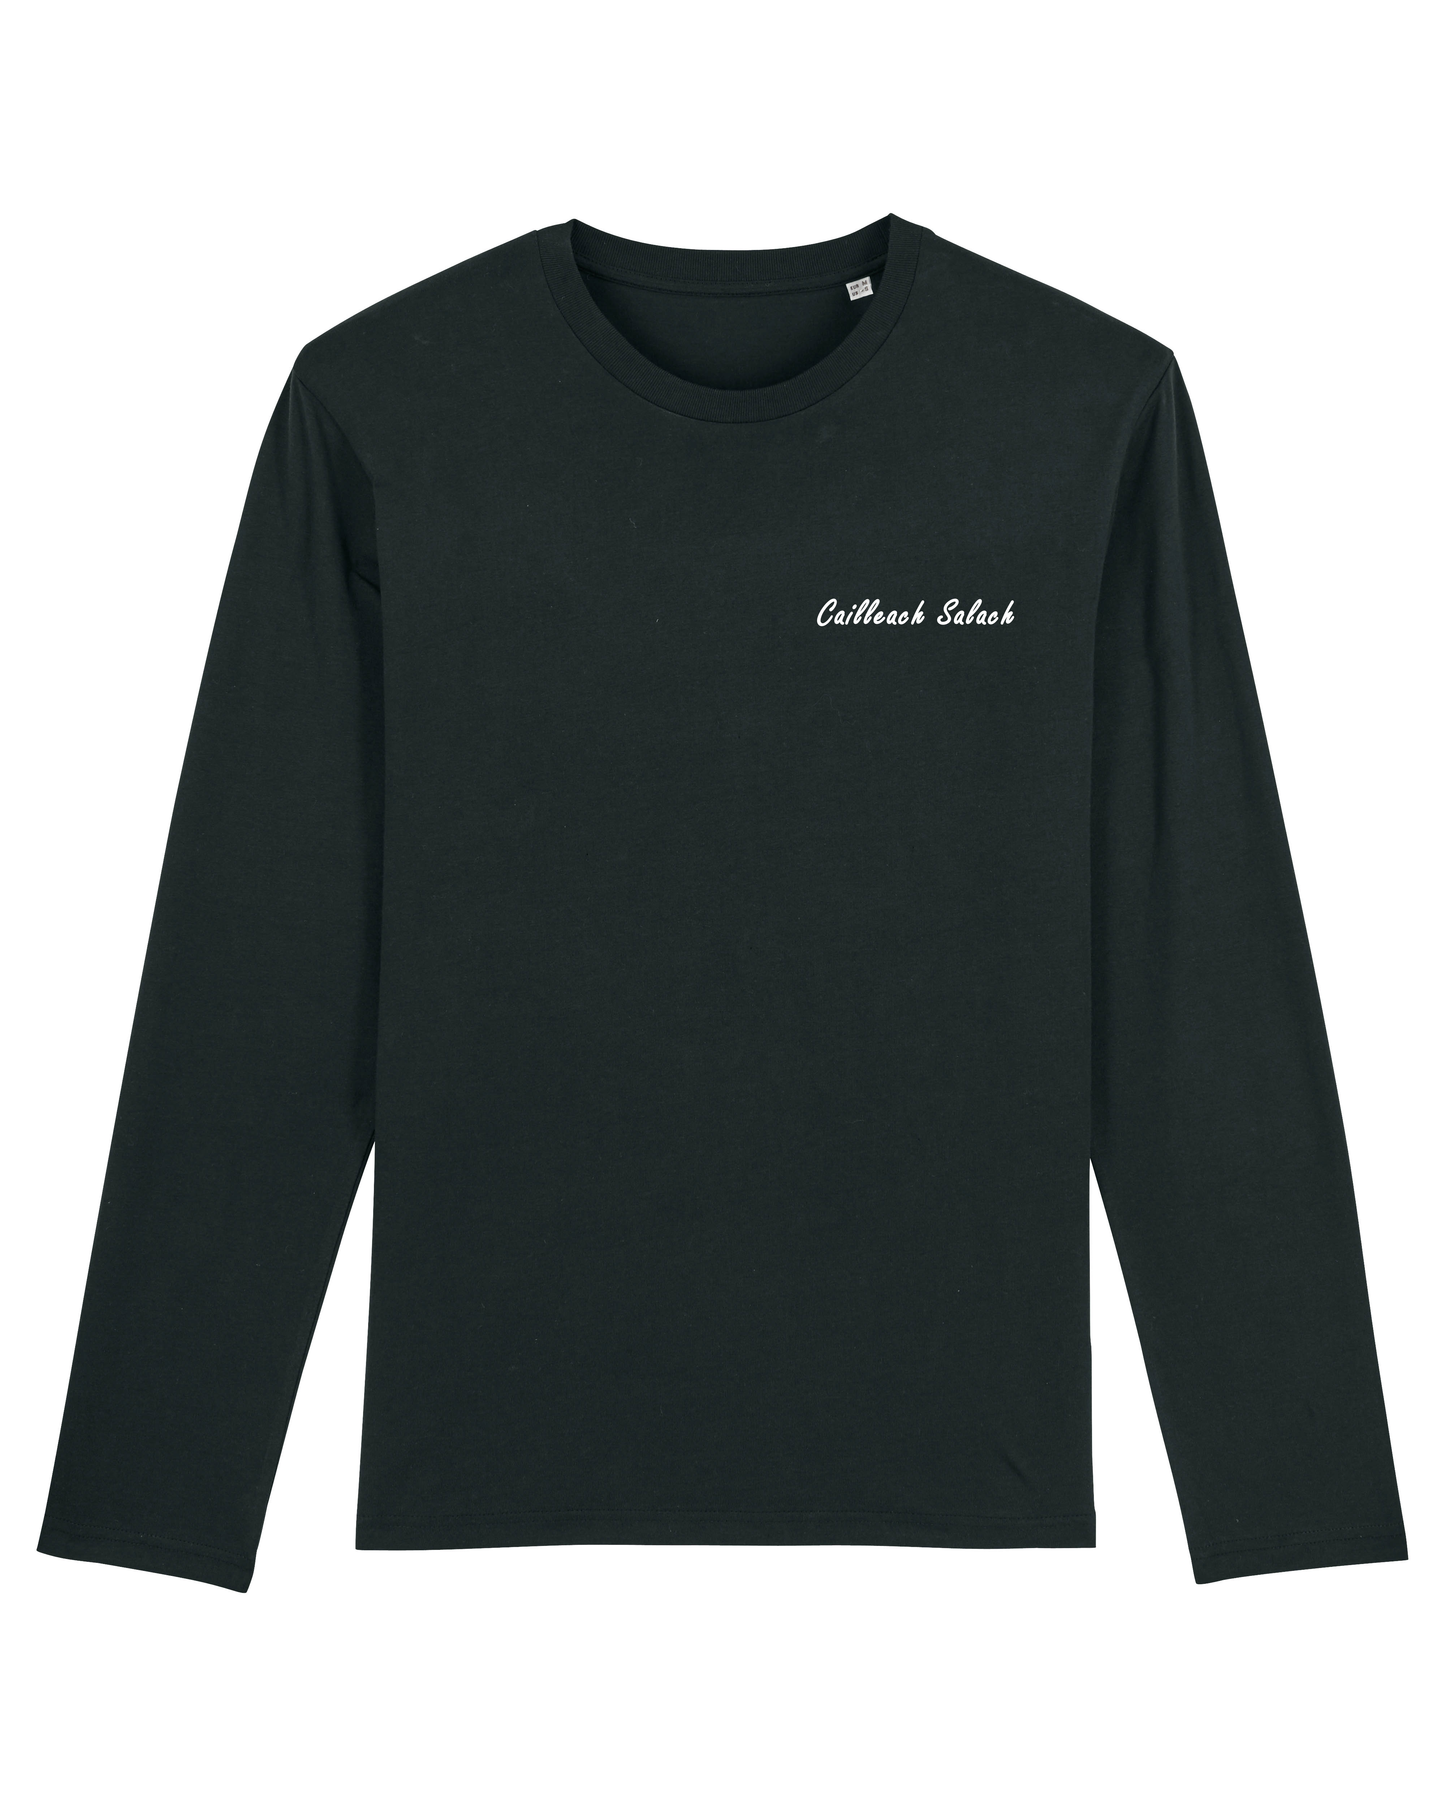 Cailleach Salach / Dirty Witch: Organic Cotton Long Sleeved Tee - Beanantees